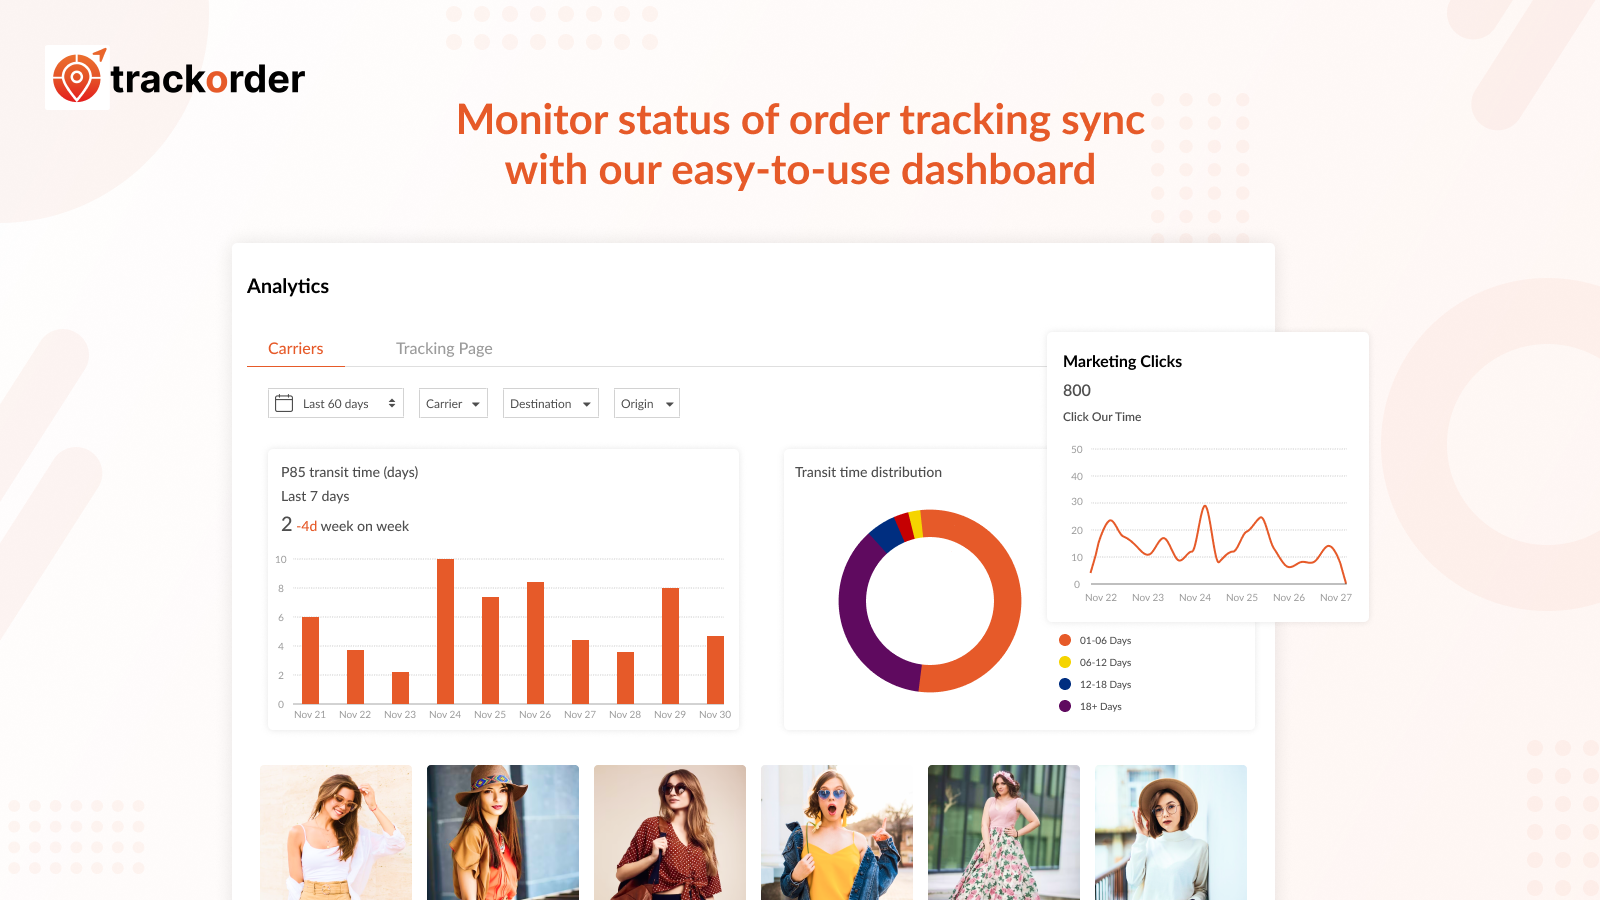 Monitor status of order tracking with easy-to-use dashboard